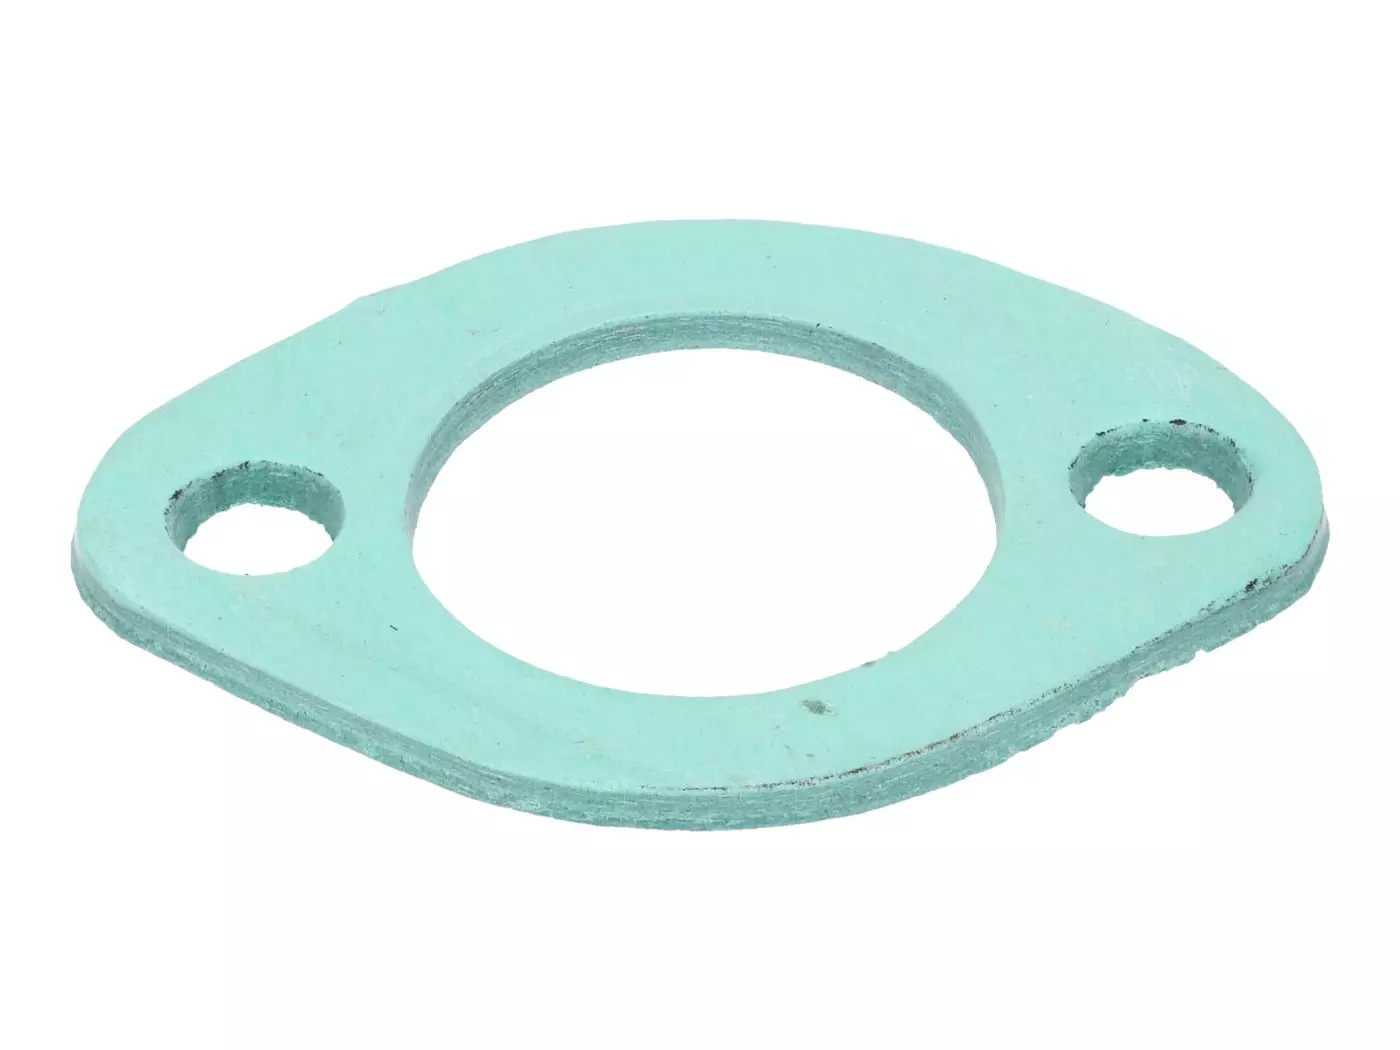 Exhaust Gasket 28mm Flat For Puch Maxi, MS, VS, DS, VZ